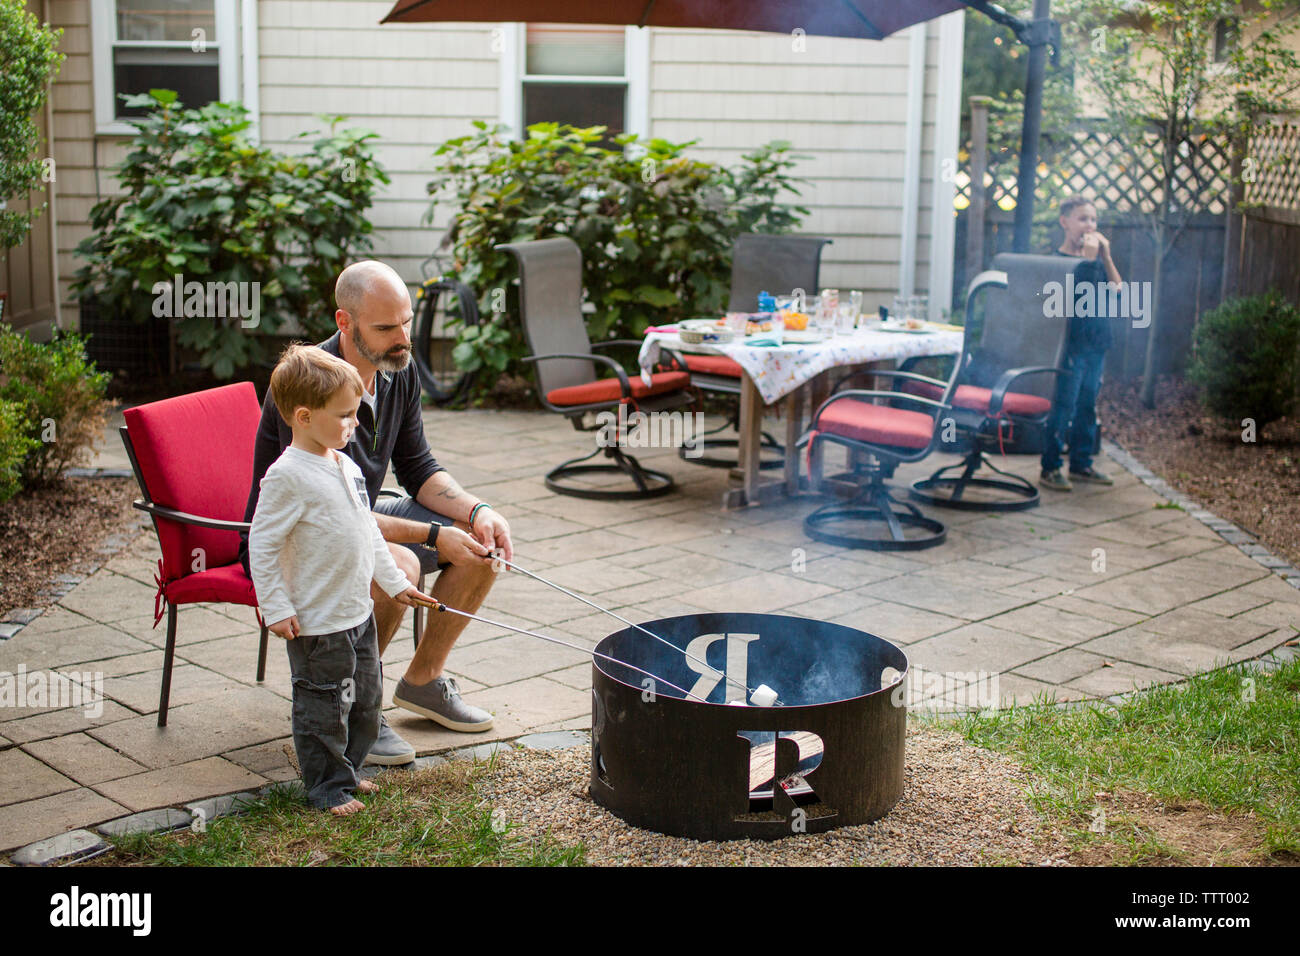 A father roasts marshmallows with children in back yard Stock Photo